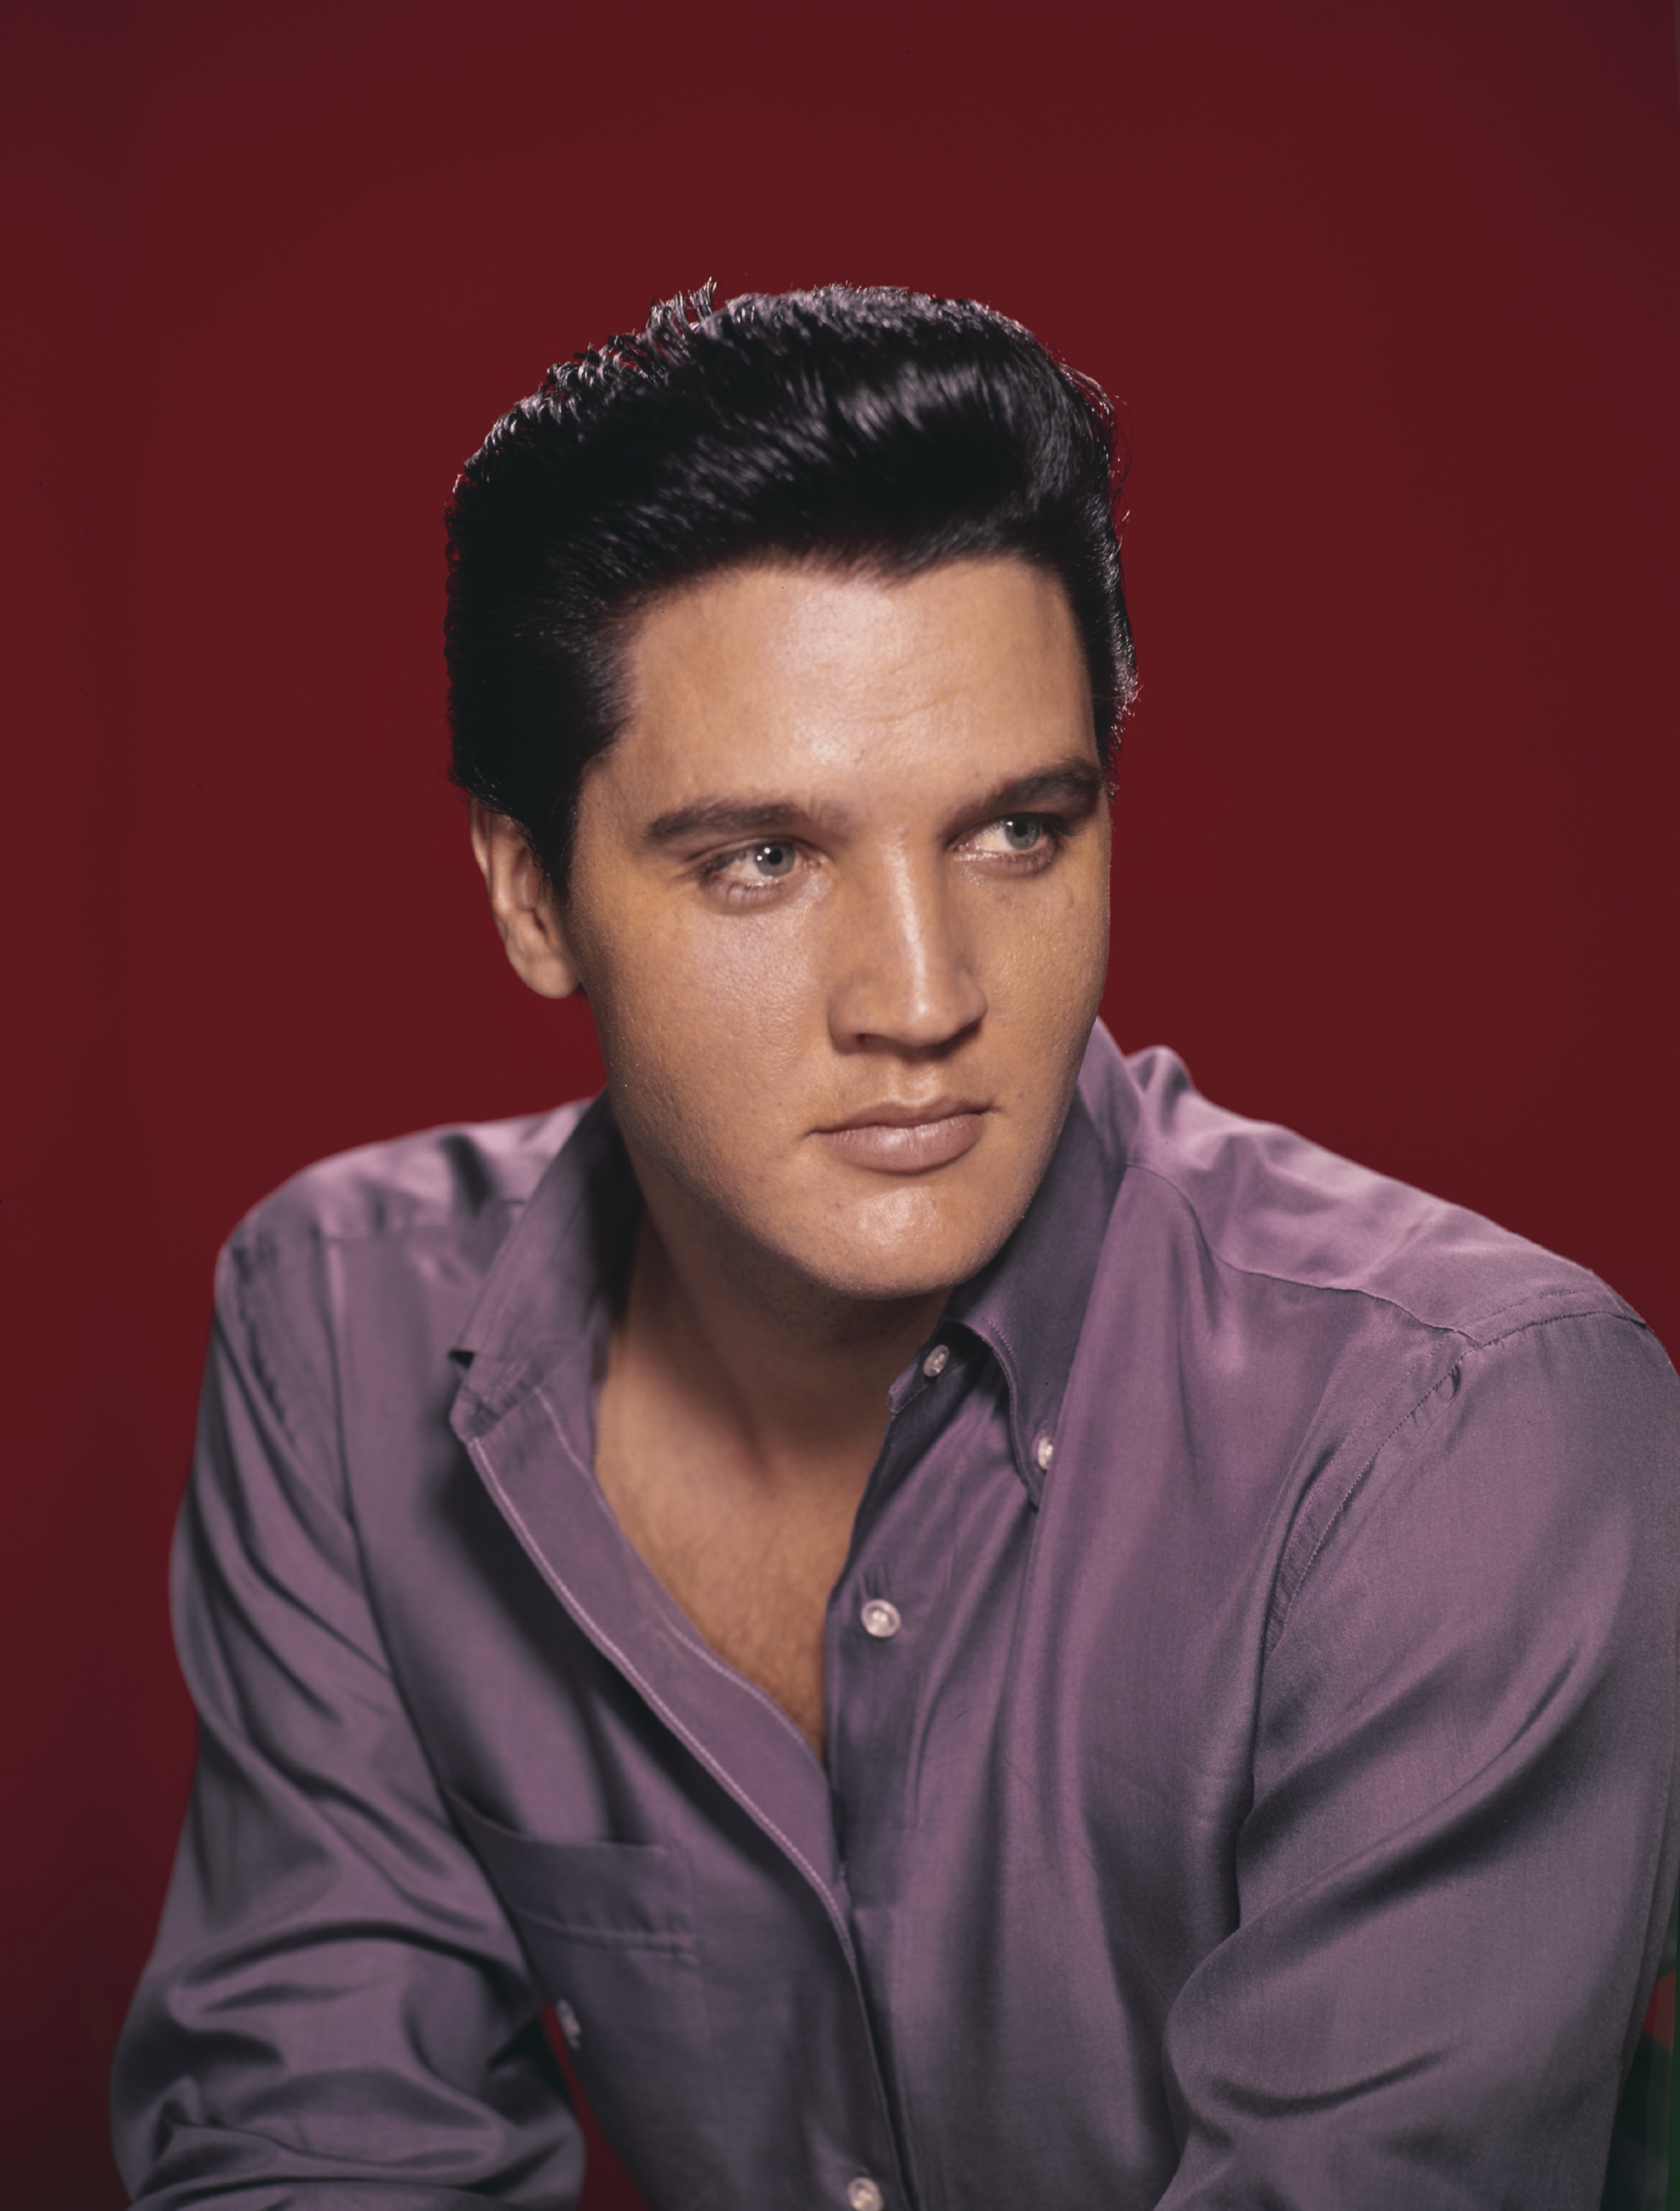 7 Fascinating Facts About Elvis Presley - HISTORY
